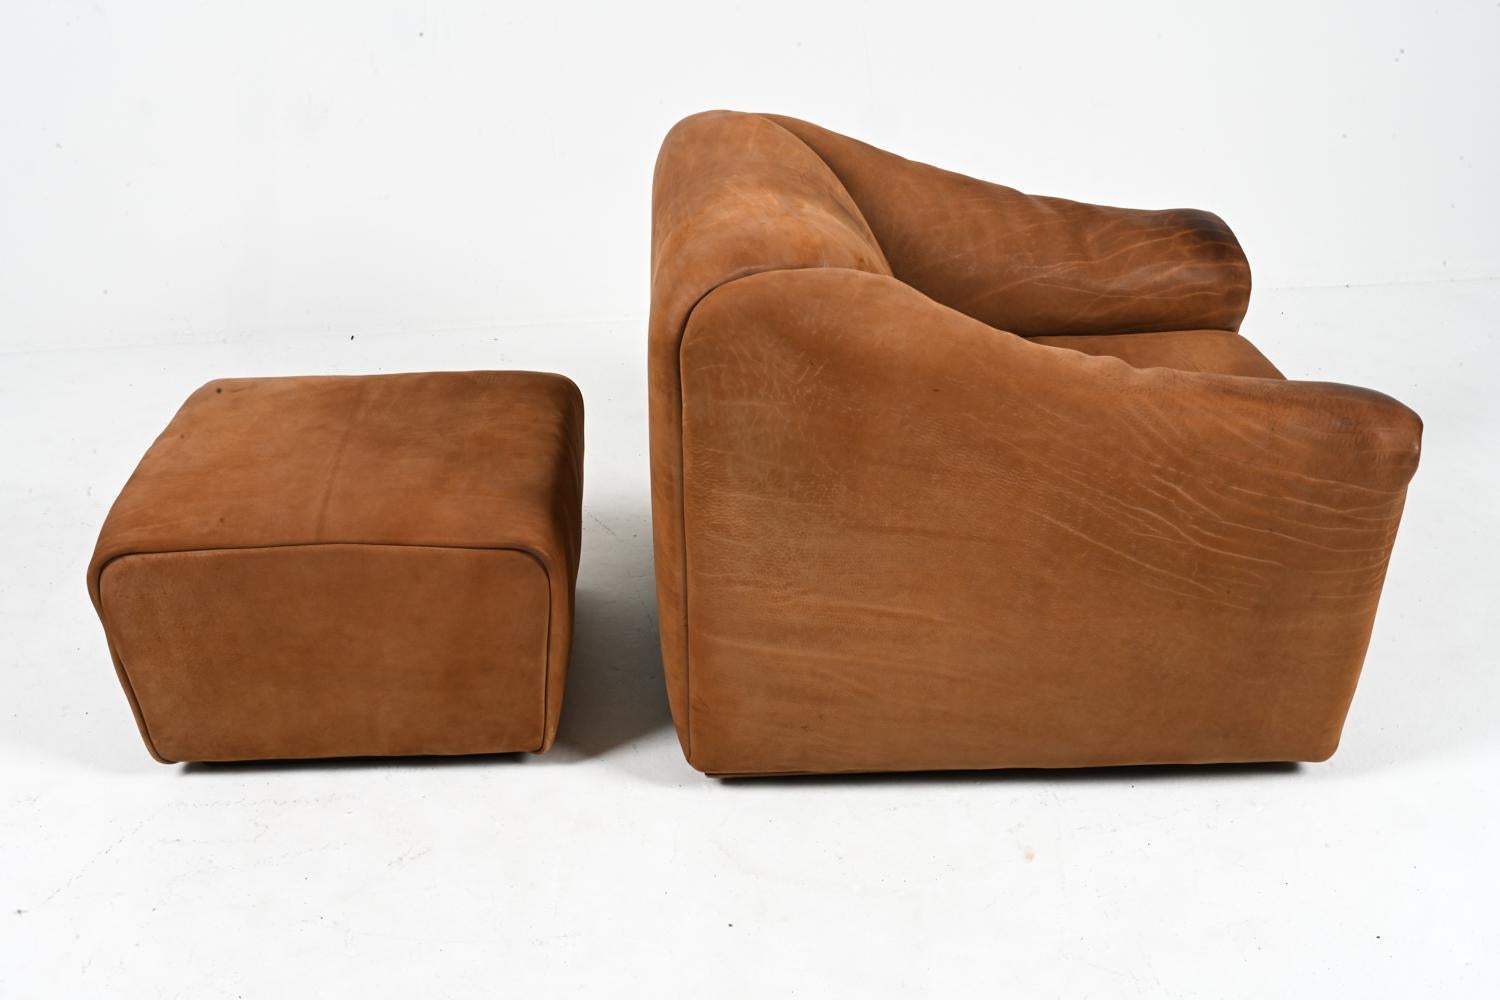 De Sede DS-47 Lounge Chair & Ottoman in Nubuck Leather, c. 1970's For Sale 6